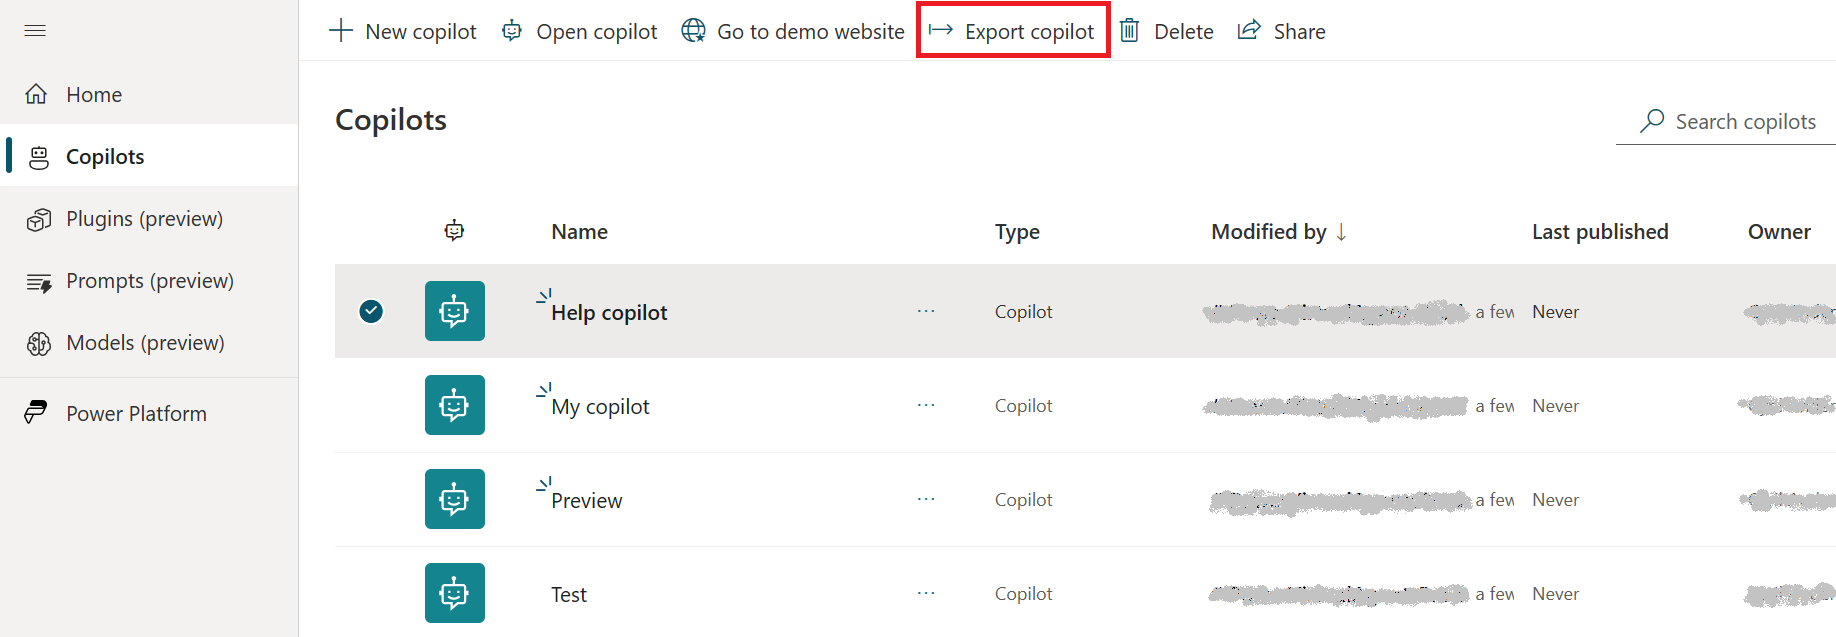 Export / Import a typebot